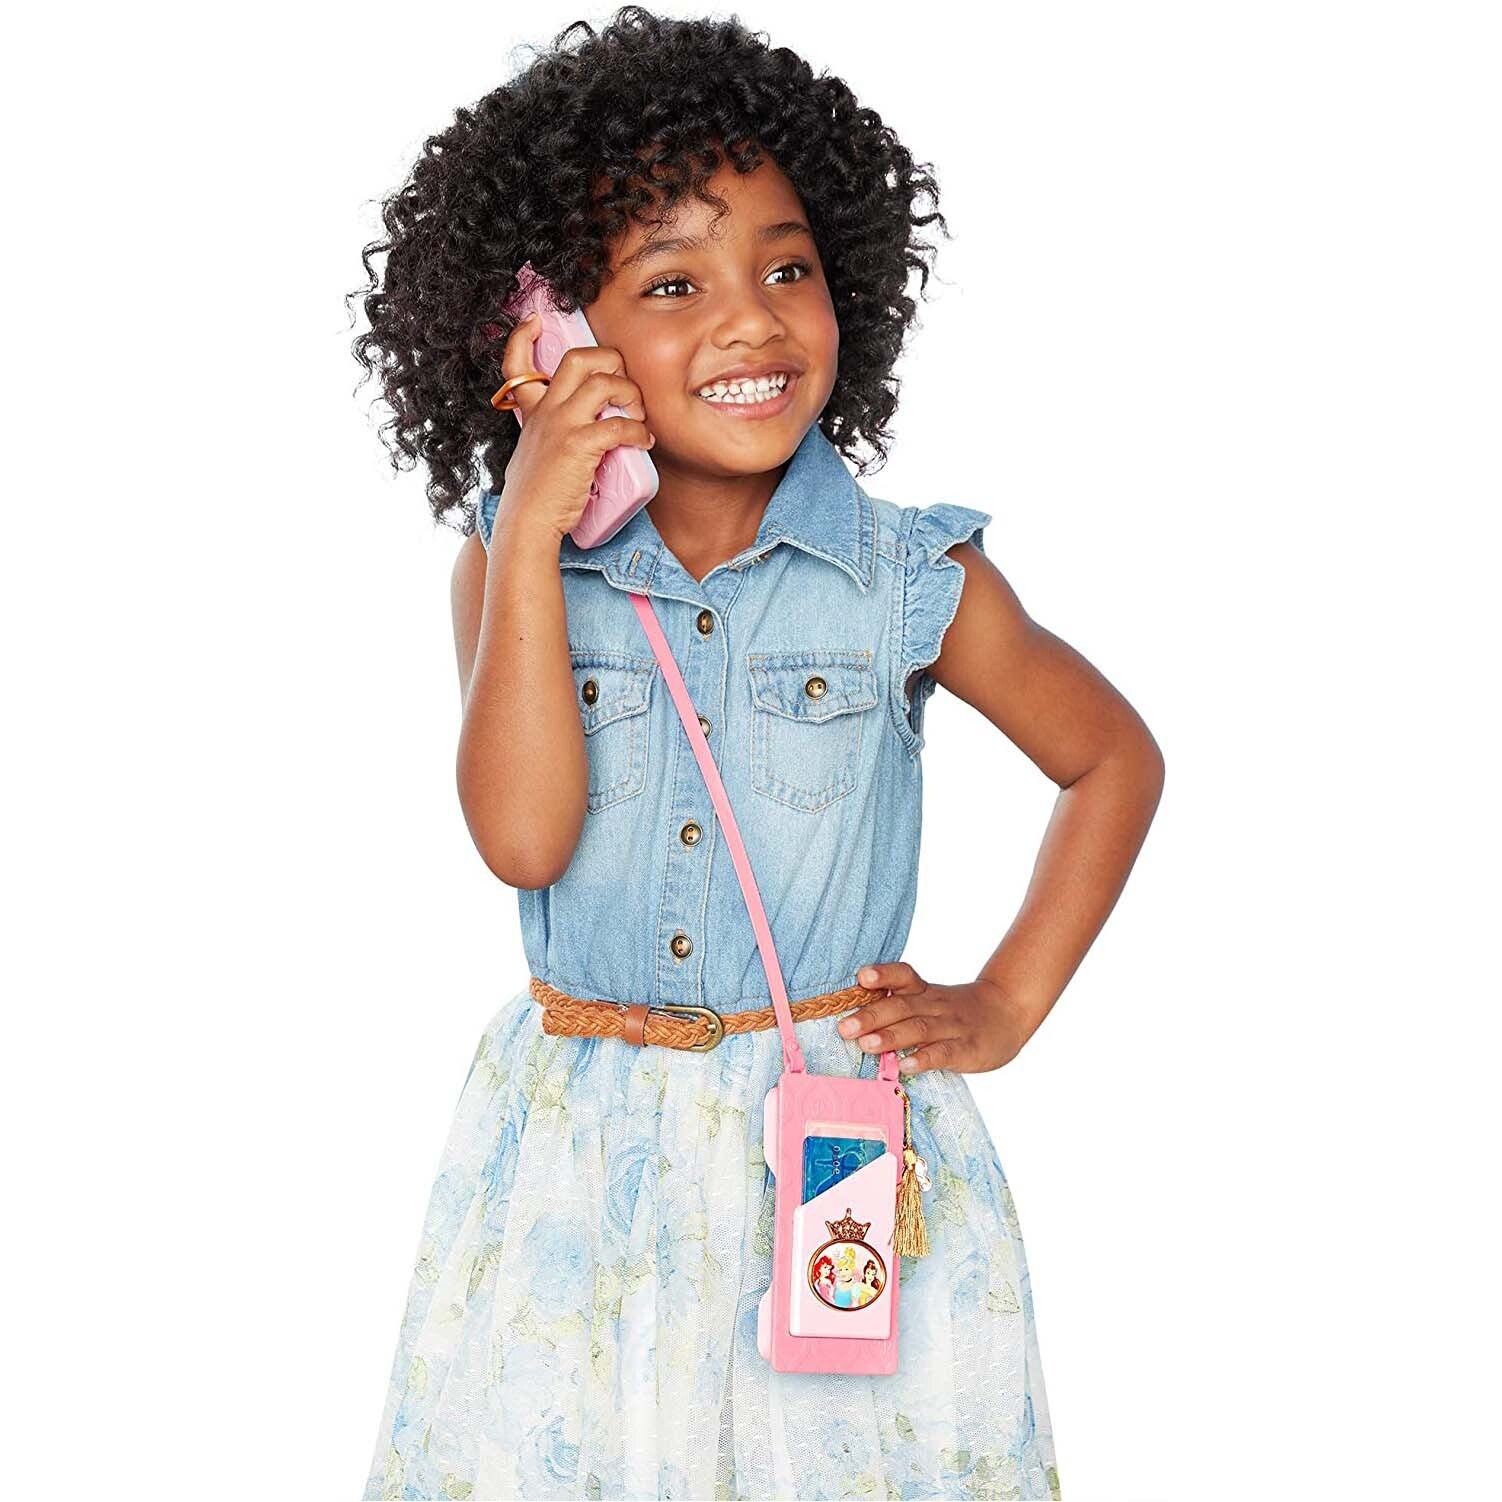 Disney Princess Style Collection - On The Go Play Phone Set